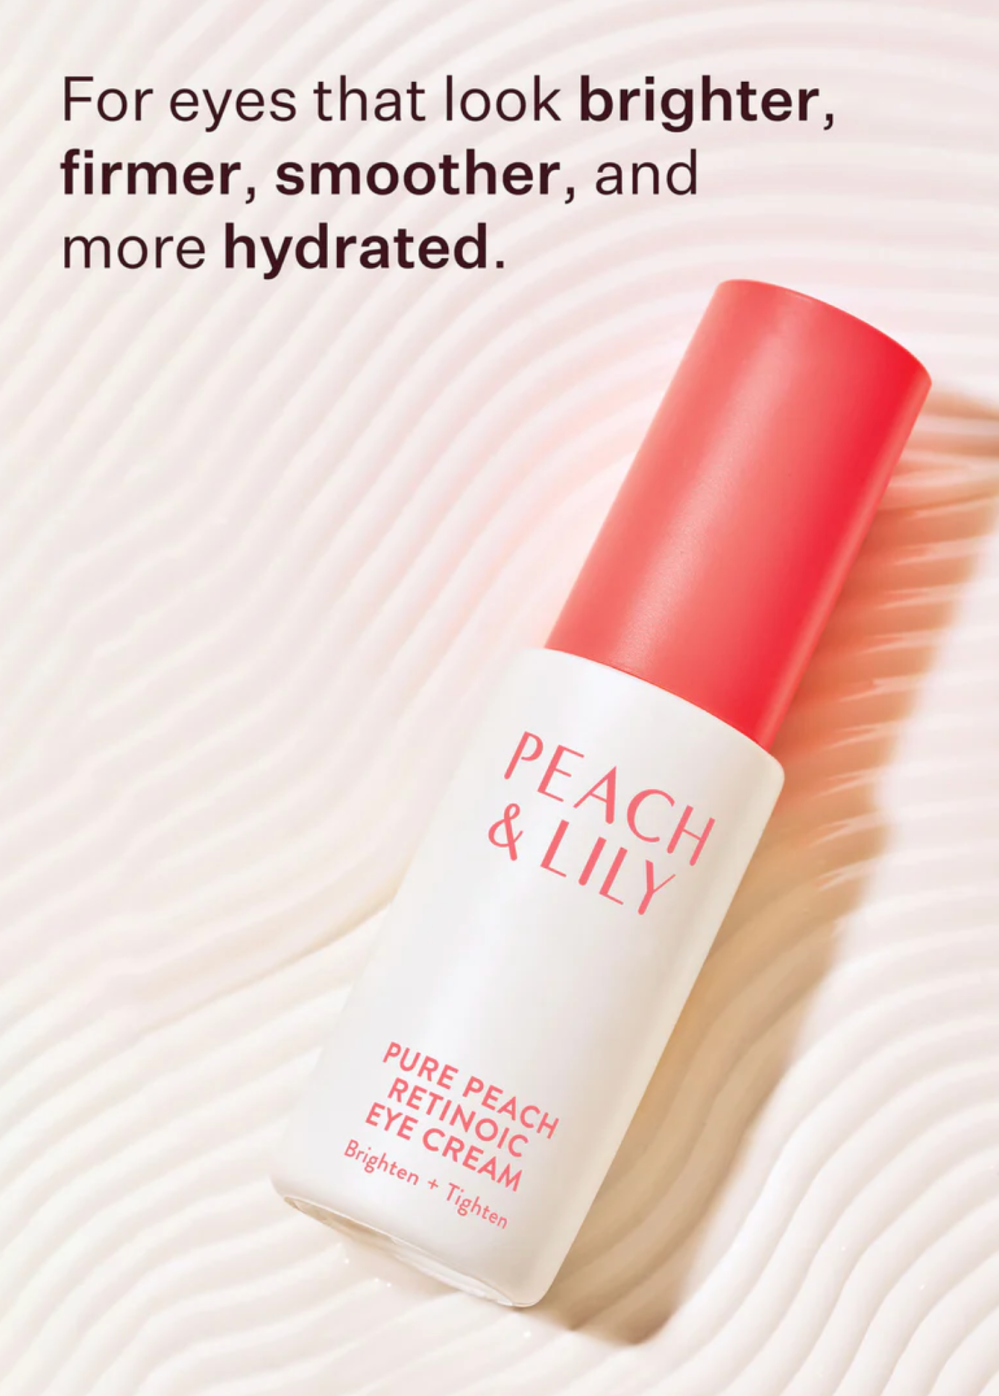 Brighten and Tighten Tired, Dehydrated Eyes With This Peach & Lily Favorite